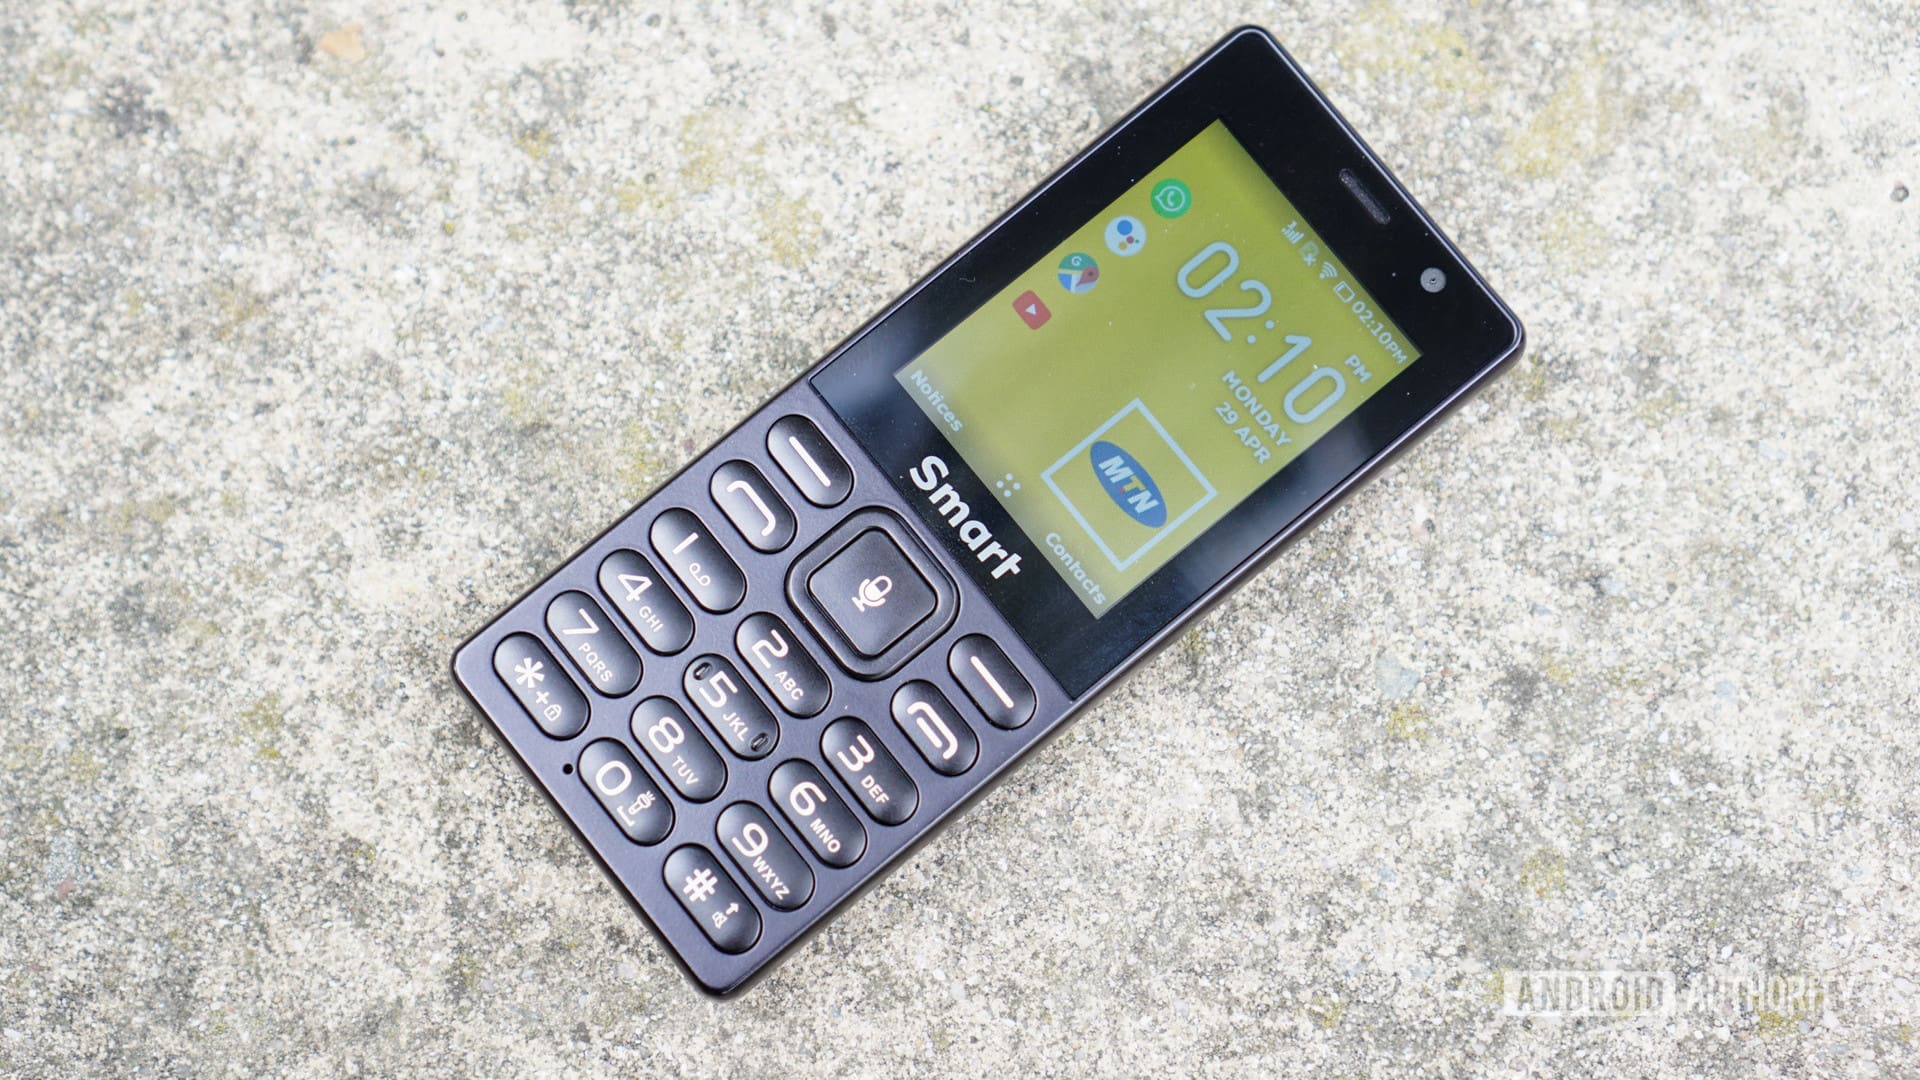 The MTN Smart S KaiOS phone, showing the home screen.